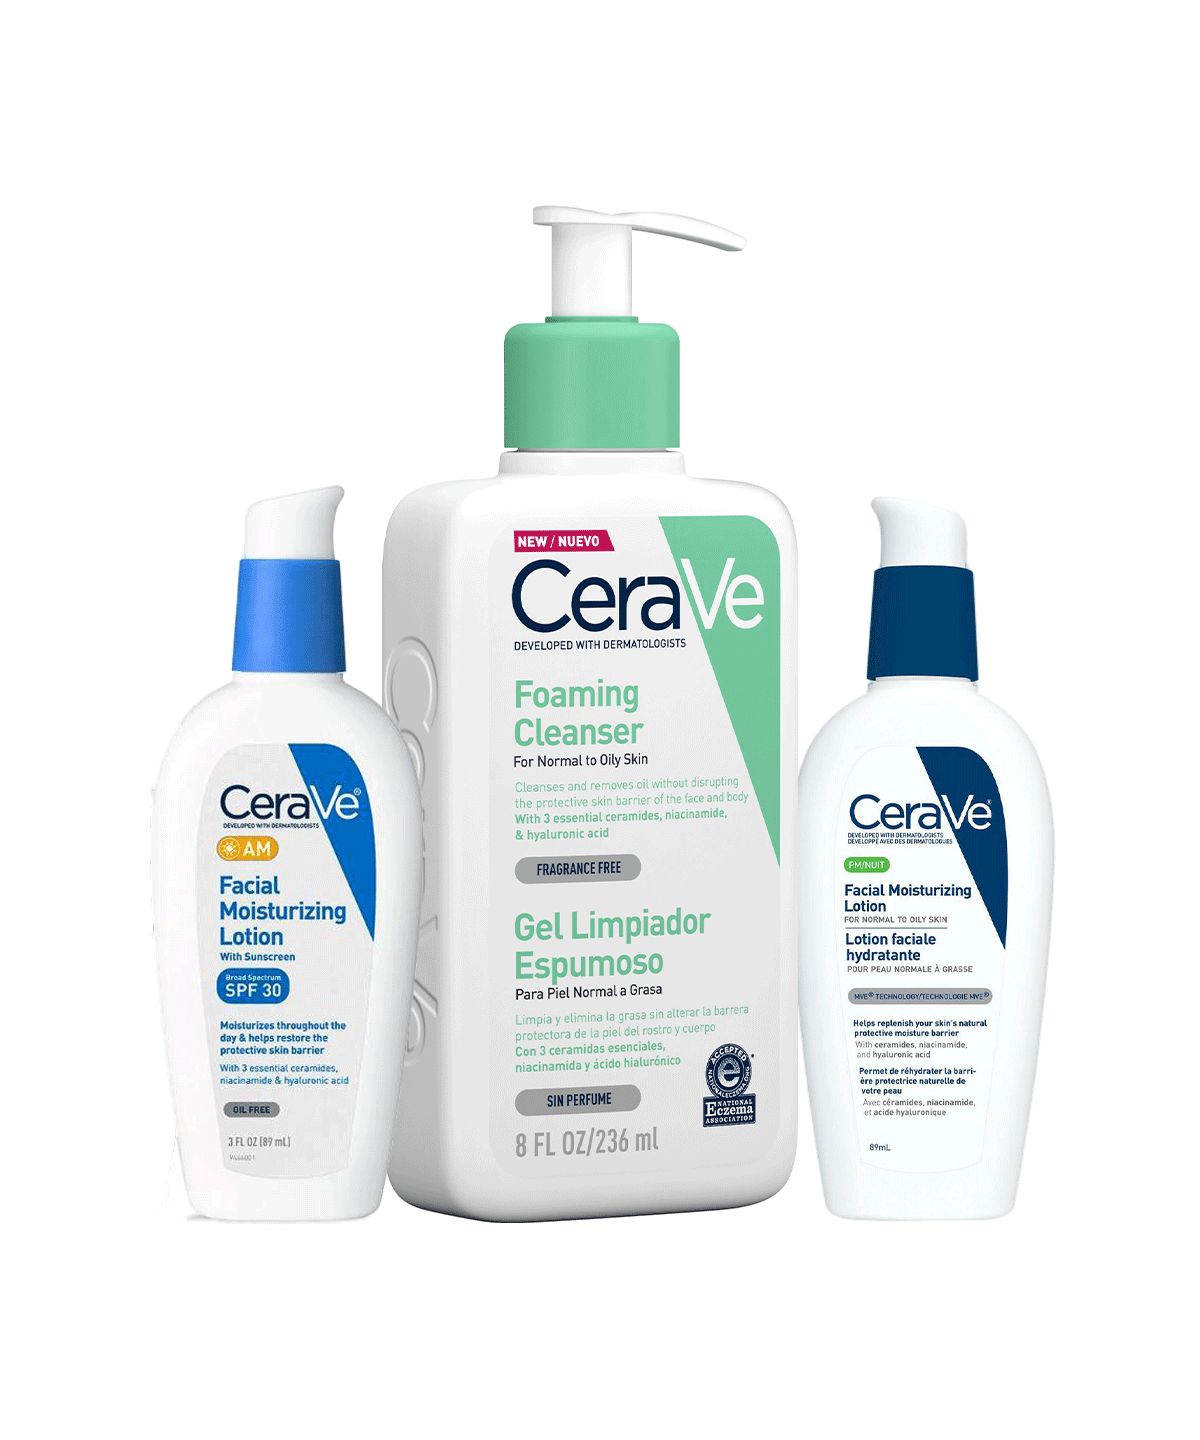 Cerave Oily Skin Care Bundle in Dubai, Abu Dhabi and all over UAE at Shopey